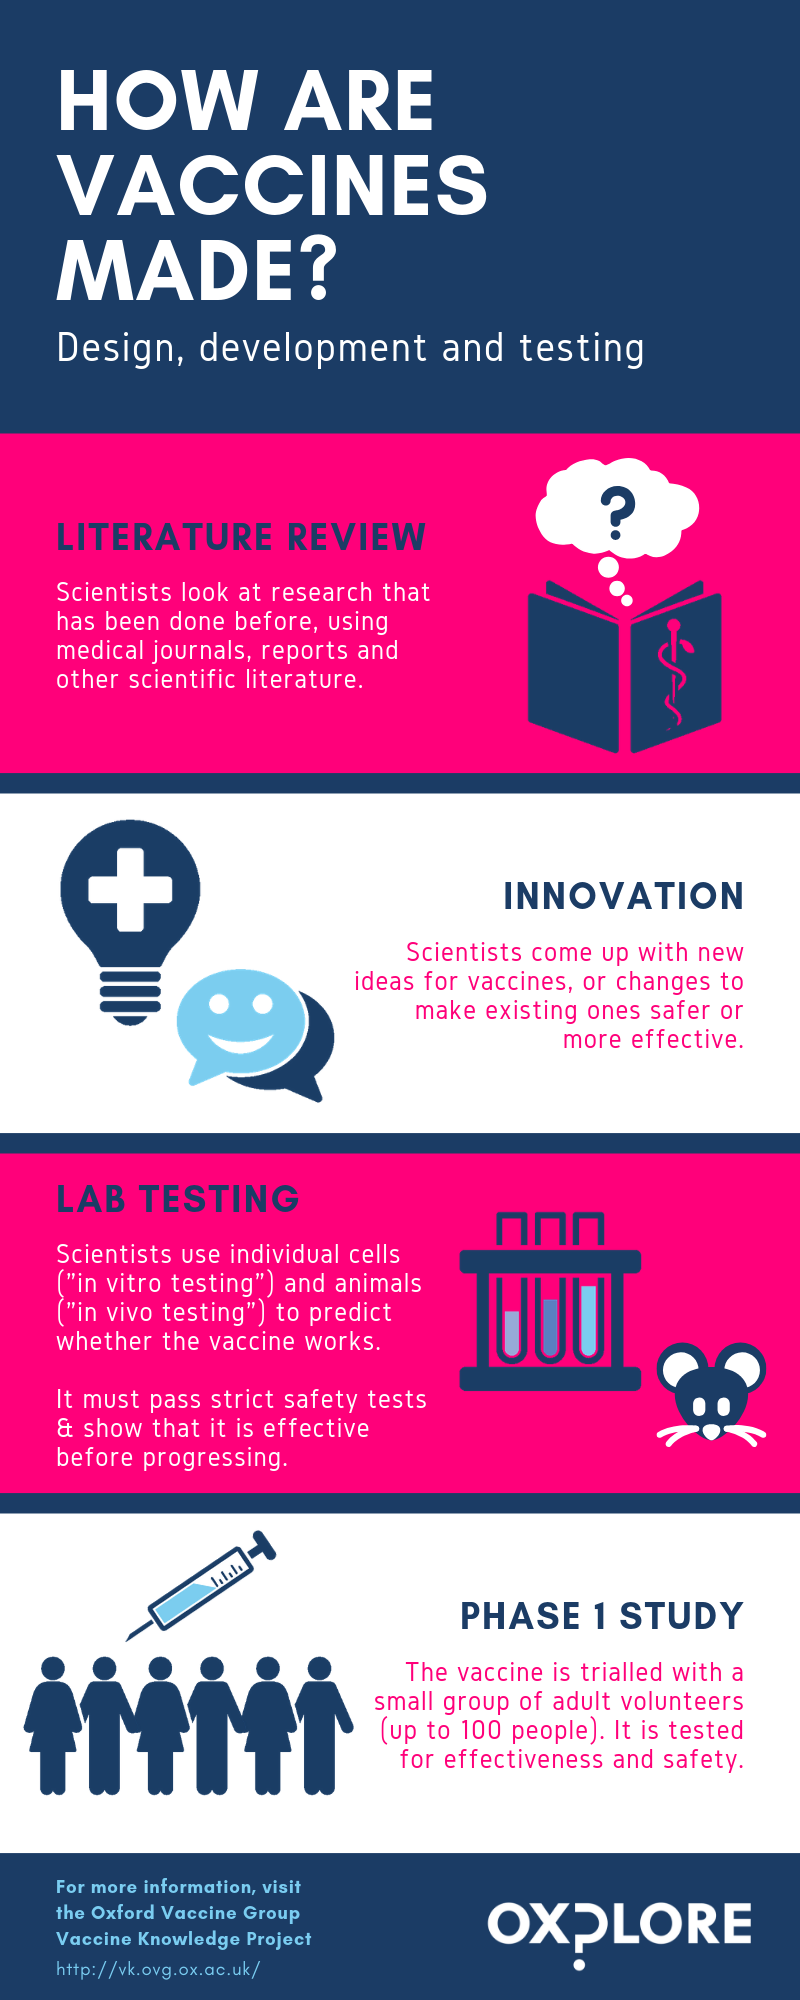 How are vaccines made and tested?